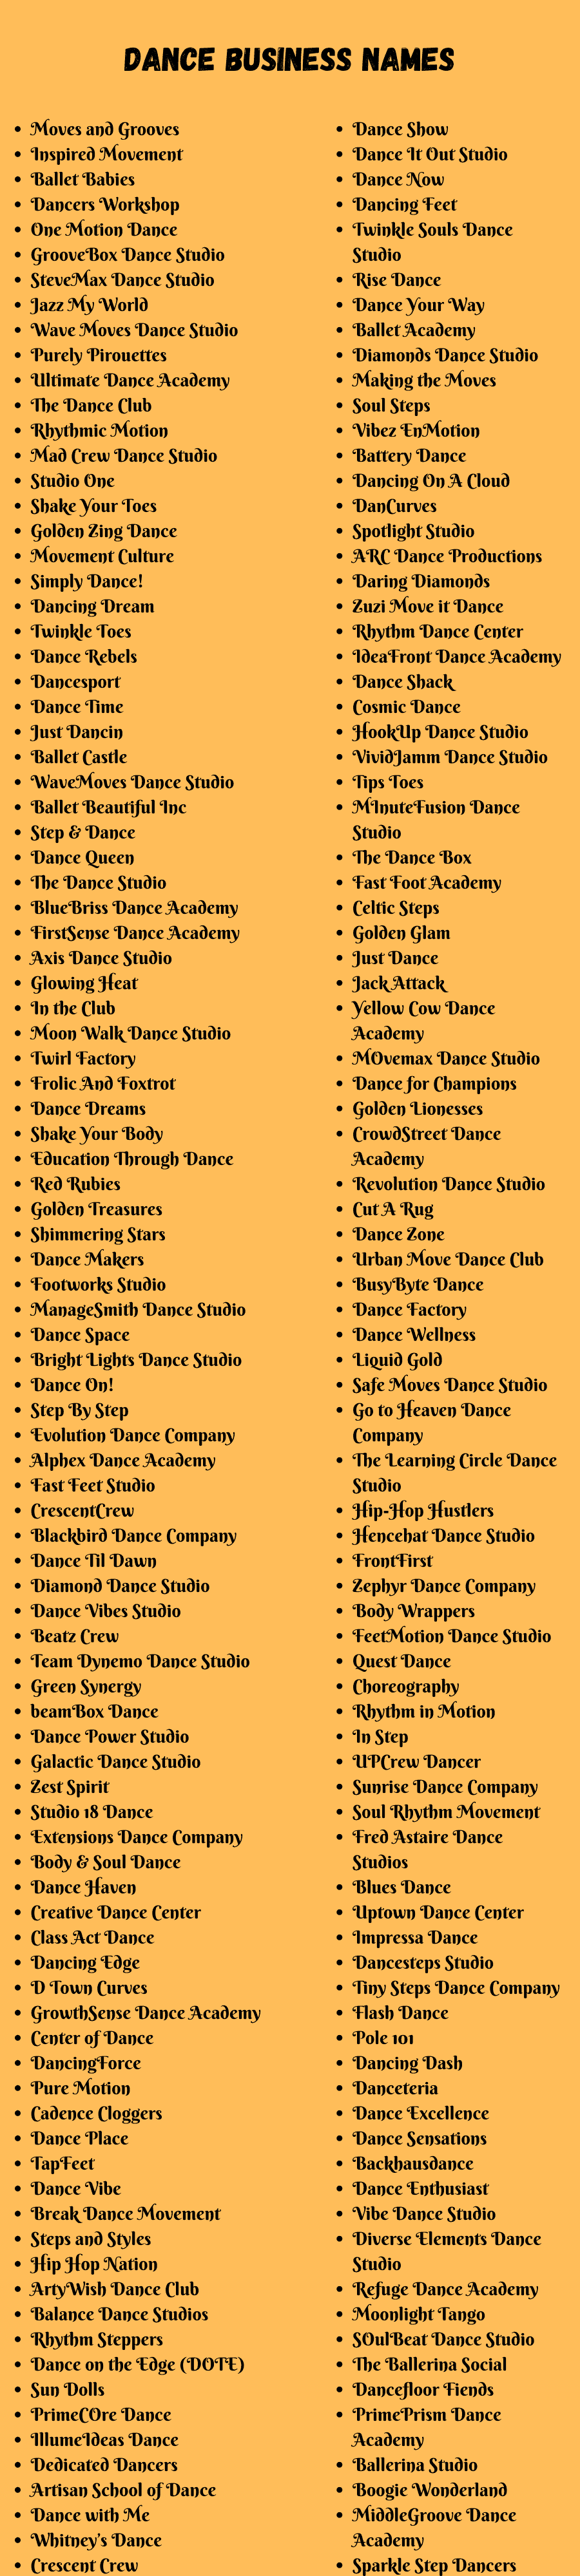 Dance Business Names